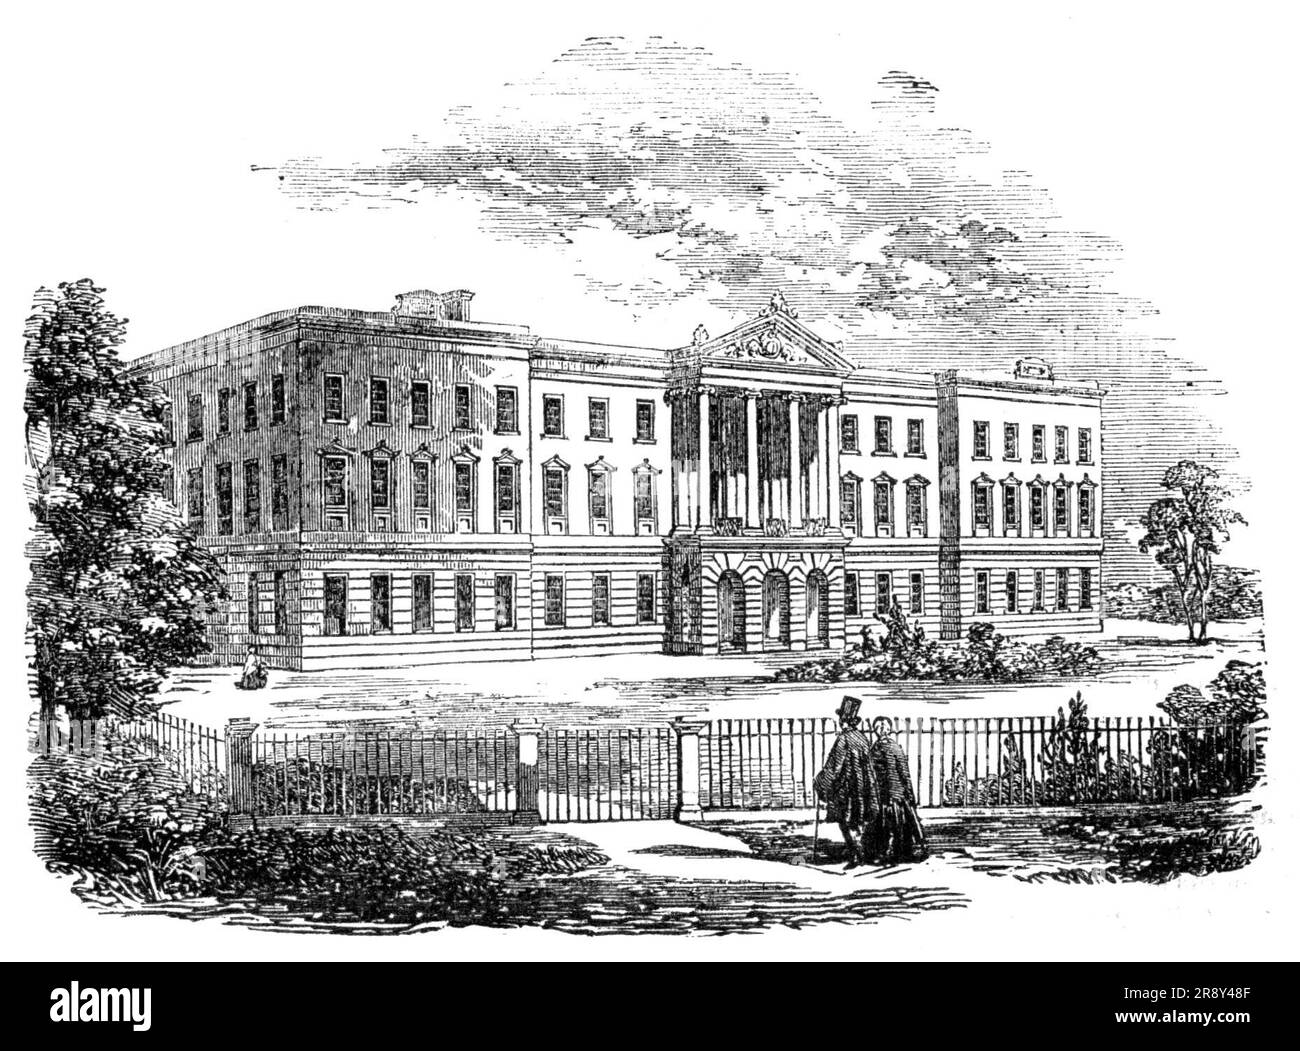 St. Ann's Royal Asylum, Brixton, 1857. In 1800 '...the governors [of St. Ann's Society] determined to open a country asylum for the entire maintenance and education of 20 additional boys and girls, and Brixton-hill was chosen for the site of the new school. The present building was erected in 1829: it is a handsome edifice of three stories, surmounted by a cornice and parapet, and fronted centrally by an Ionic portico and pediment...The health of the children was reported to be good, and every means had been adopted to improve their intellectual culture - a reading-room, library, and museum ha Stock Photo